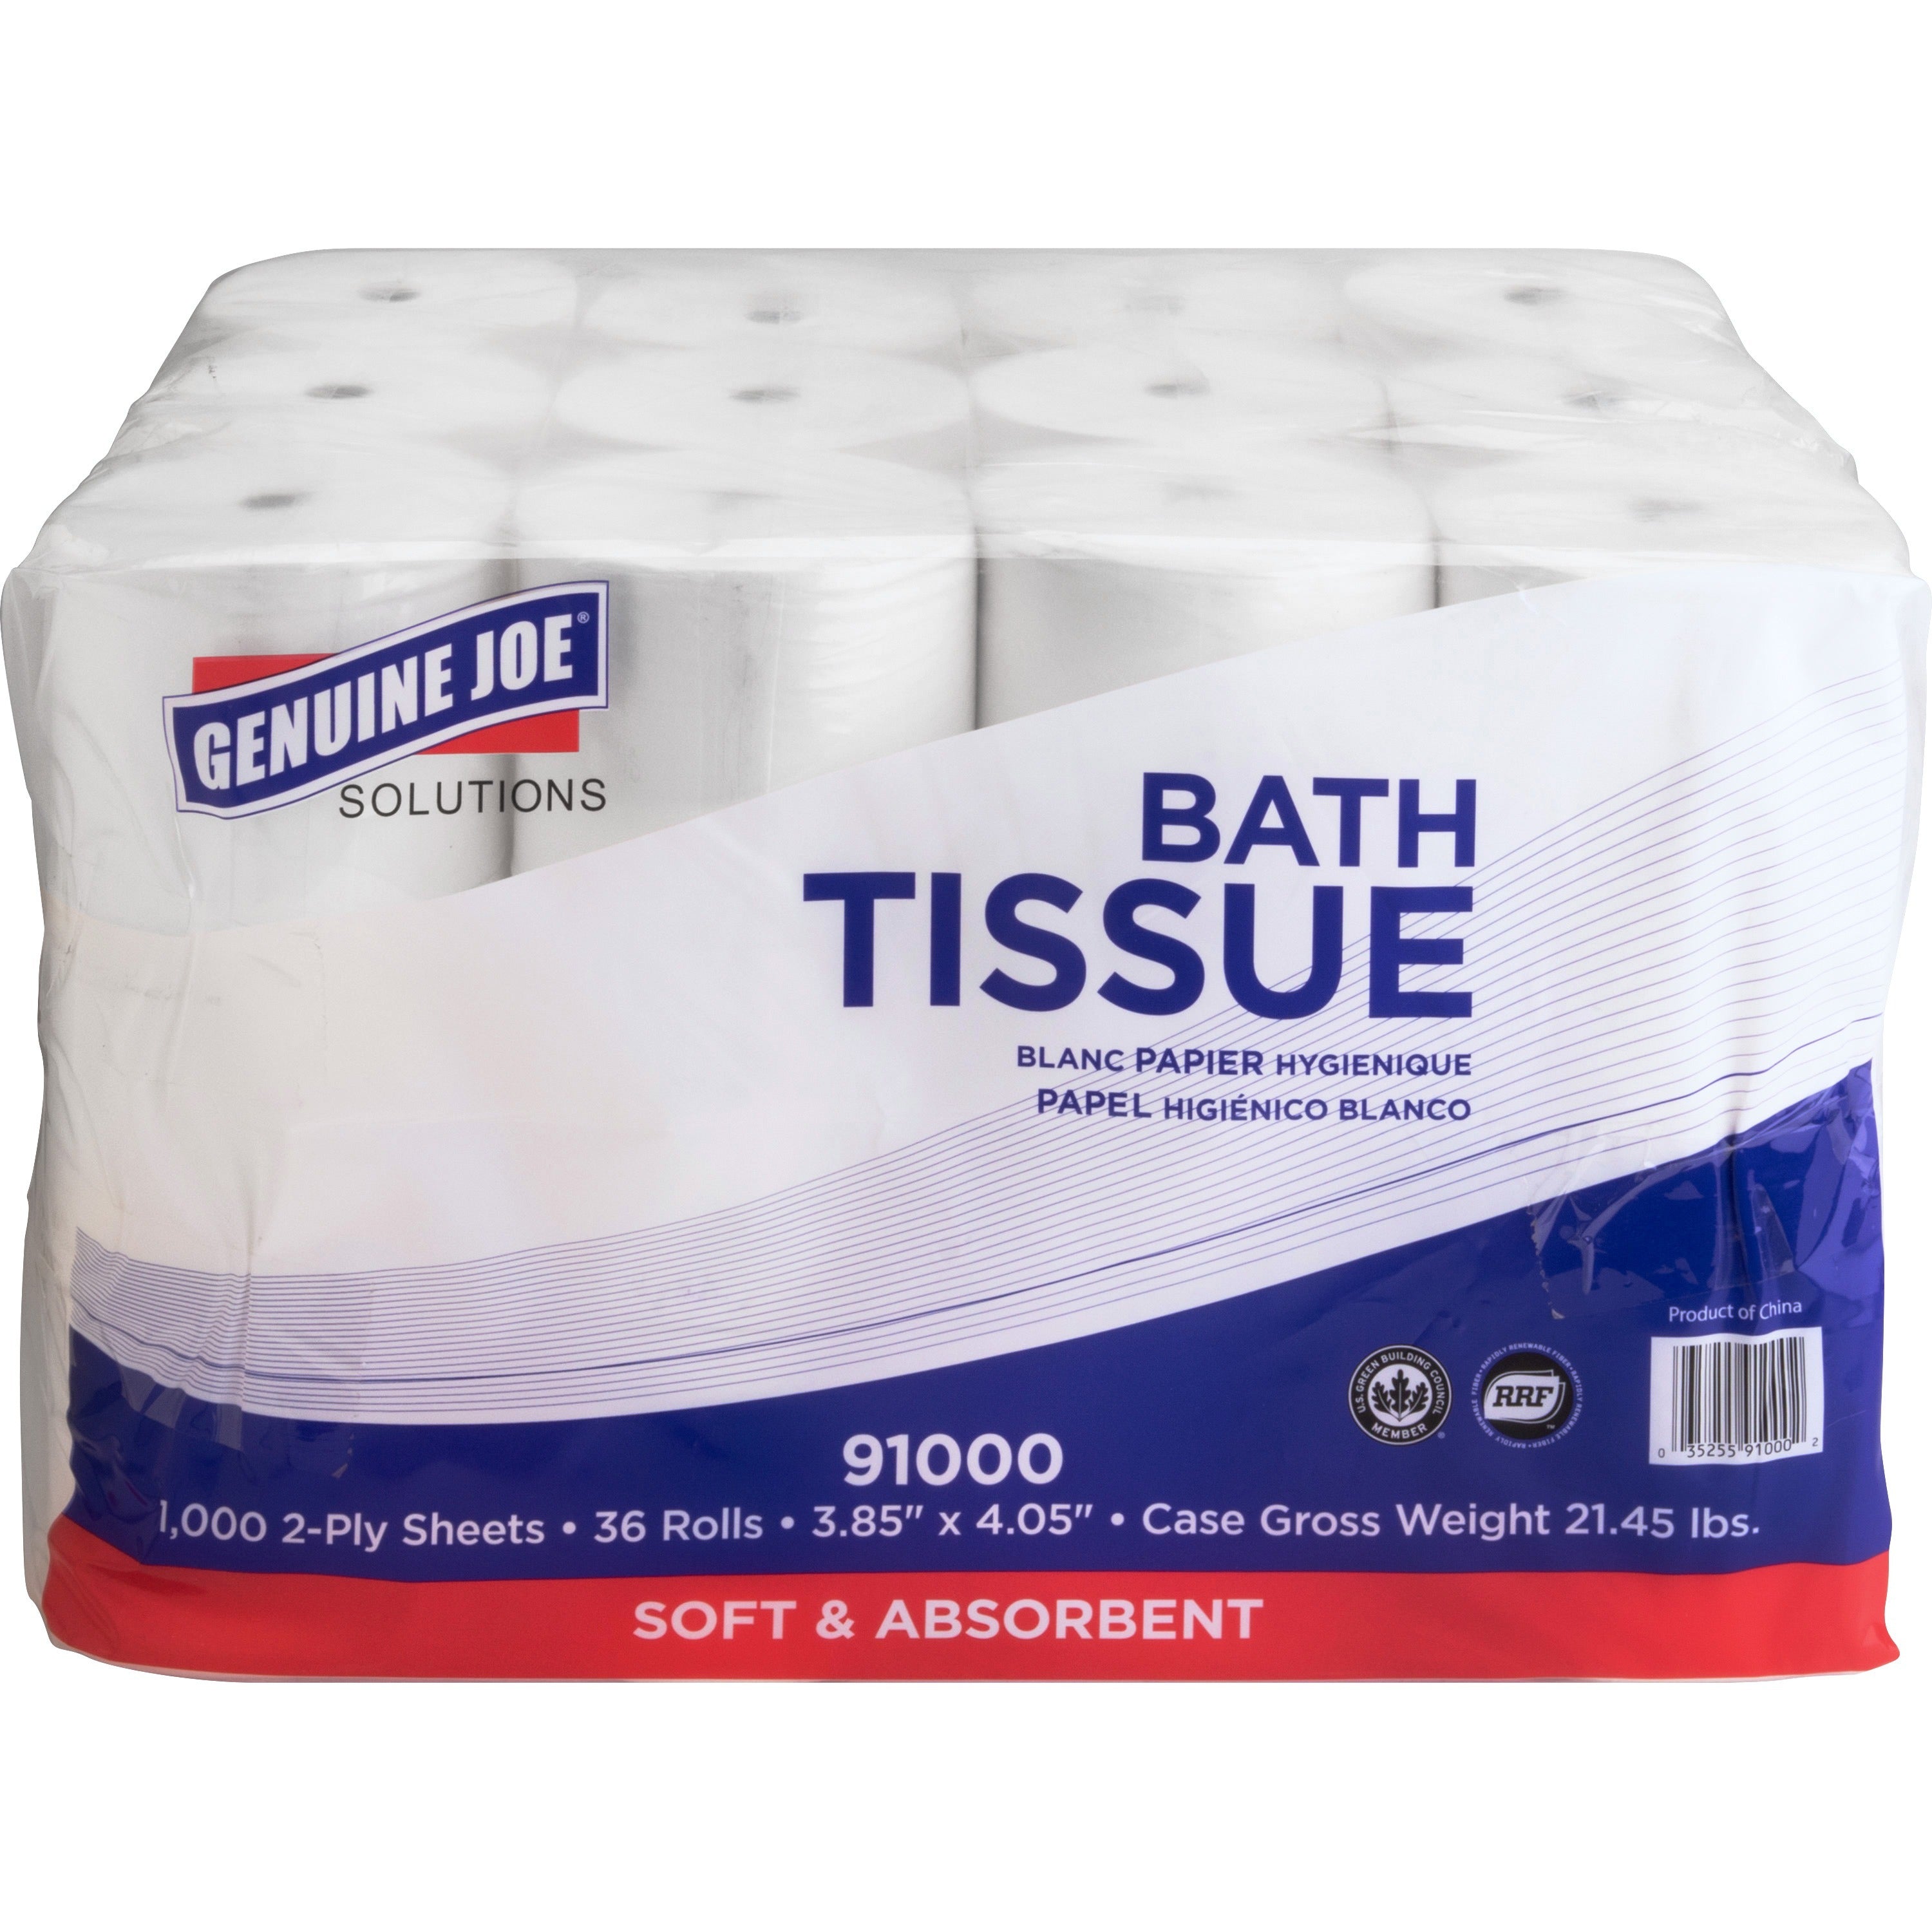 genuine-joe-solutions-double-capacity-bath-tissue-2-ply-1000-sheets-roll-white-embossed-for-bathroom-2016-pallet_gjo91000pl - 1